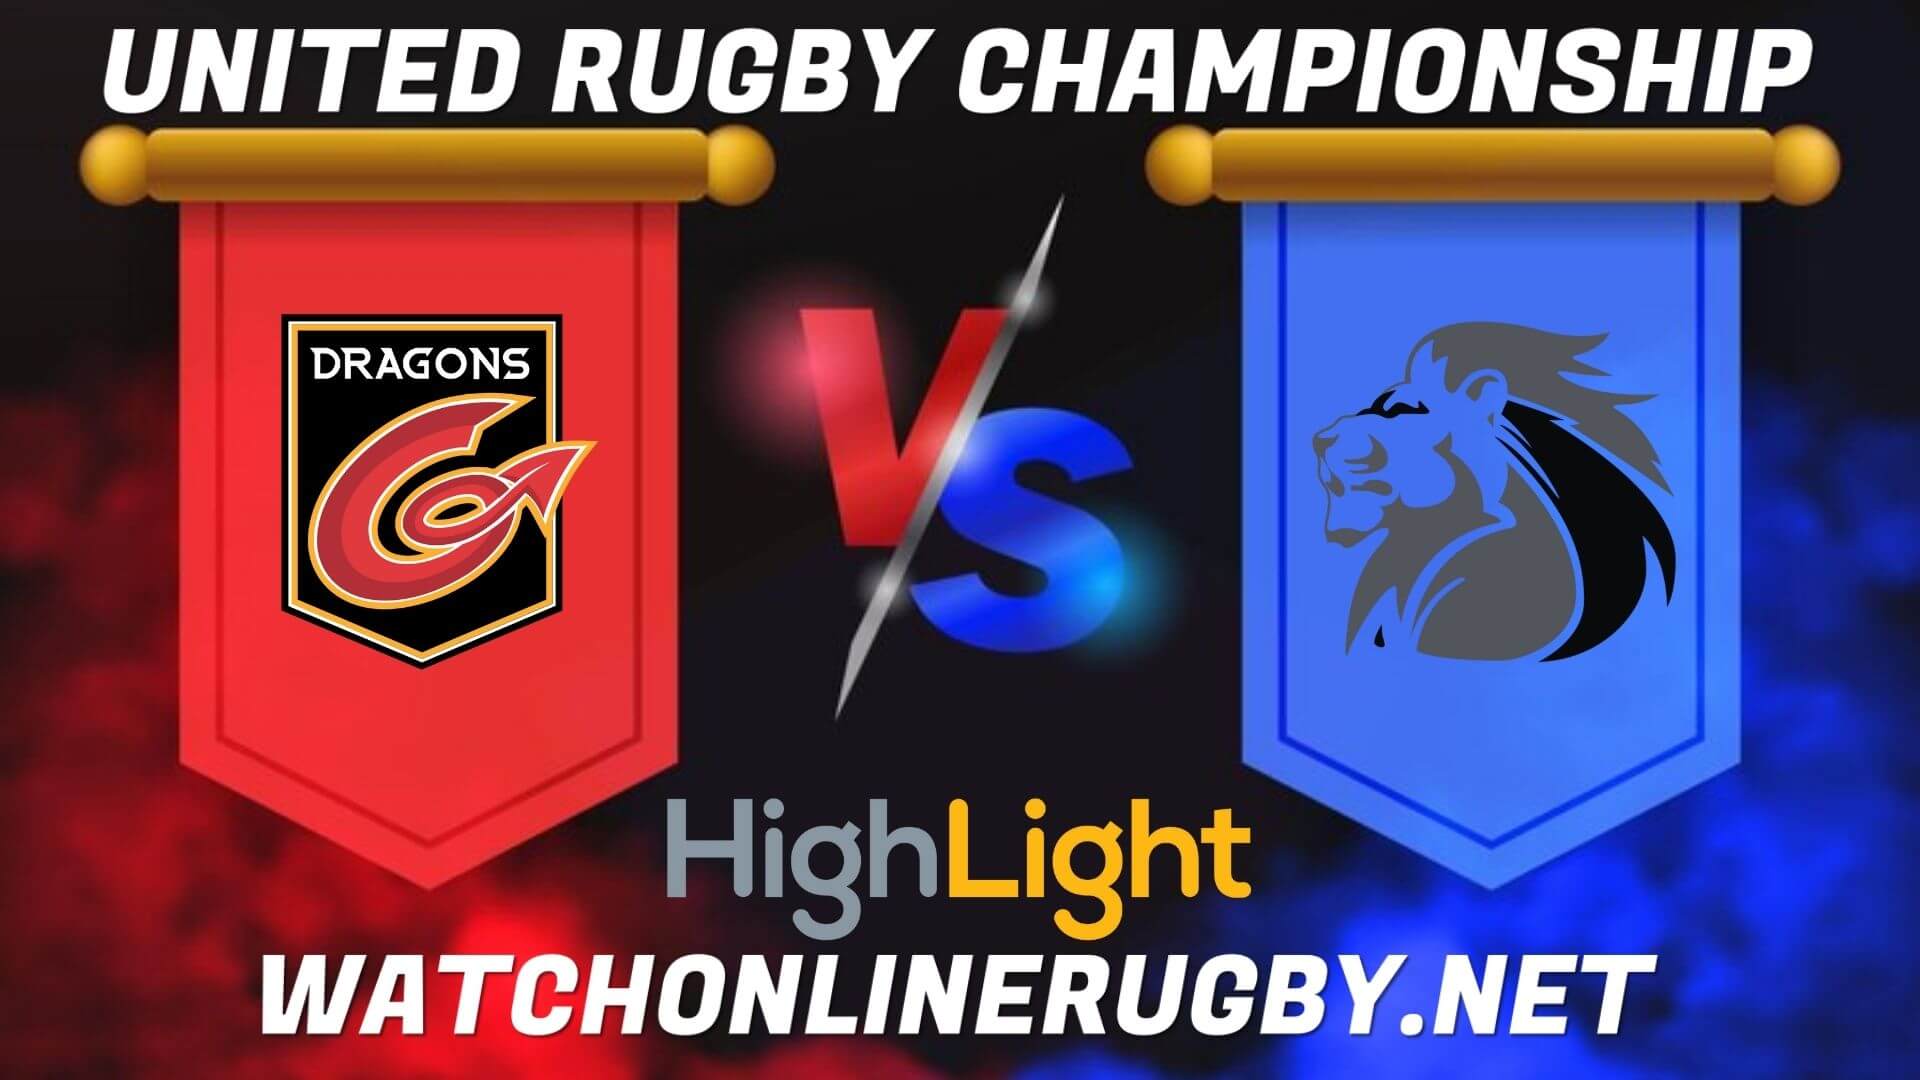 Dragons Vs Lions United Rugby Championship 2022 RD 18